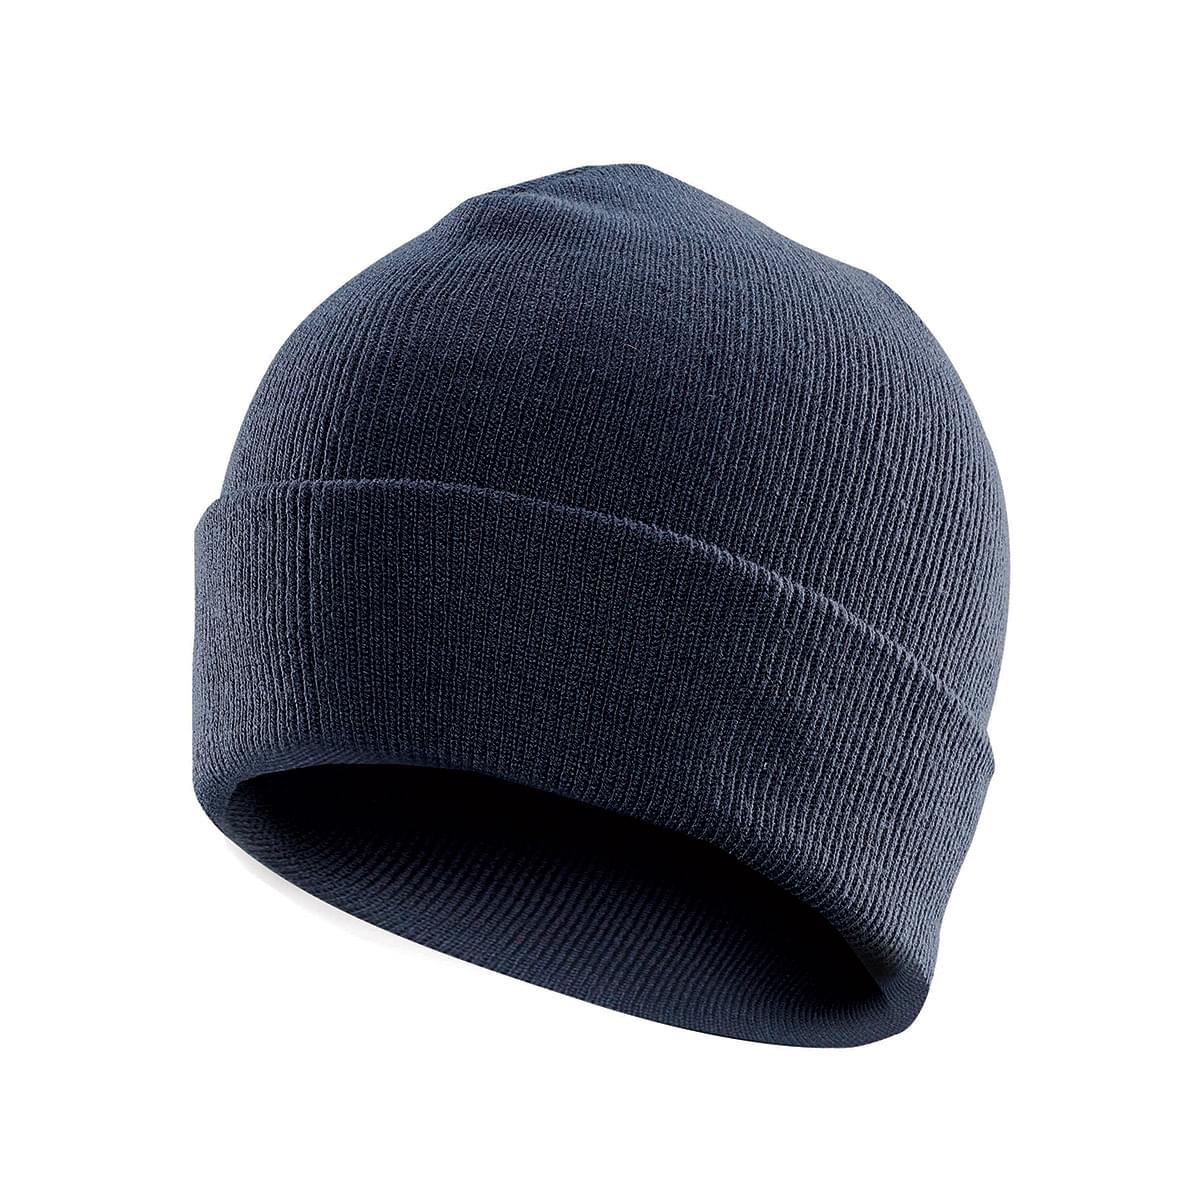 100% Soft Acrylic - Black Single Piece Solid Color Beanie Classic